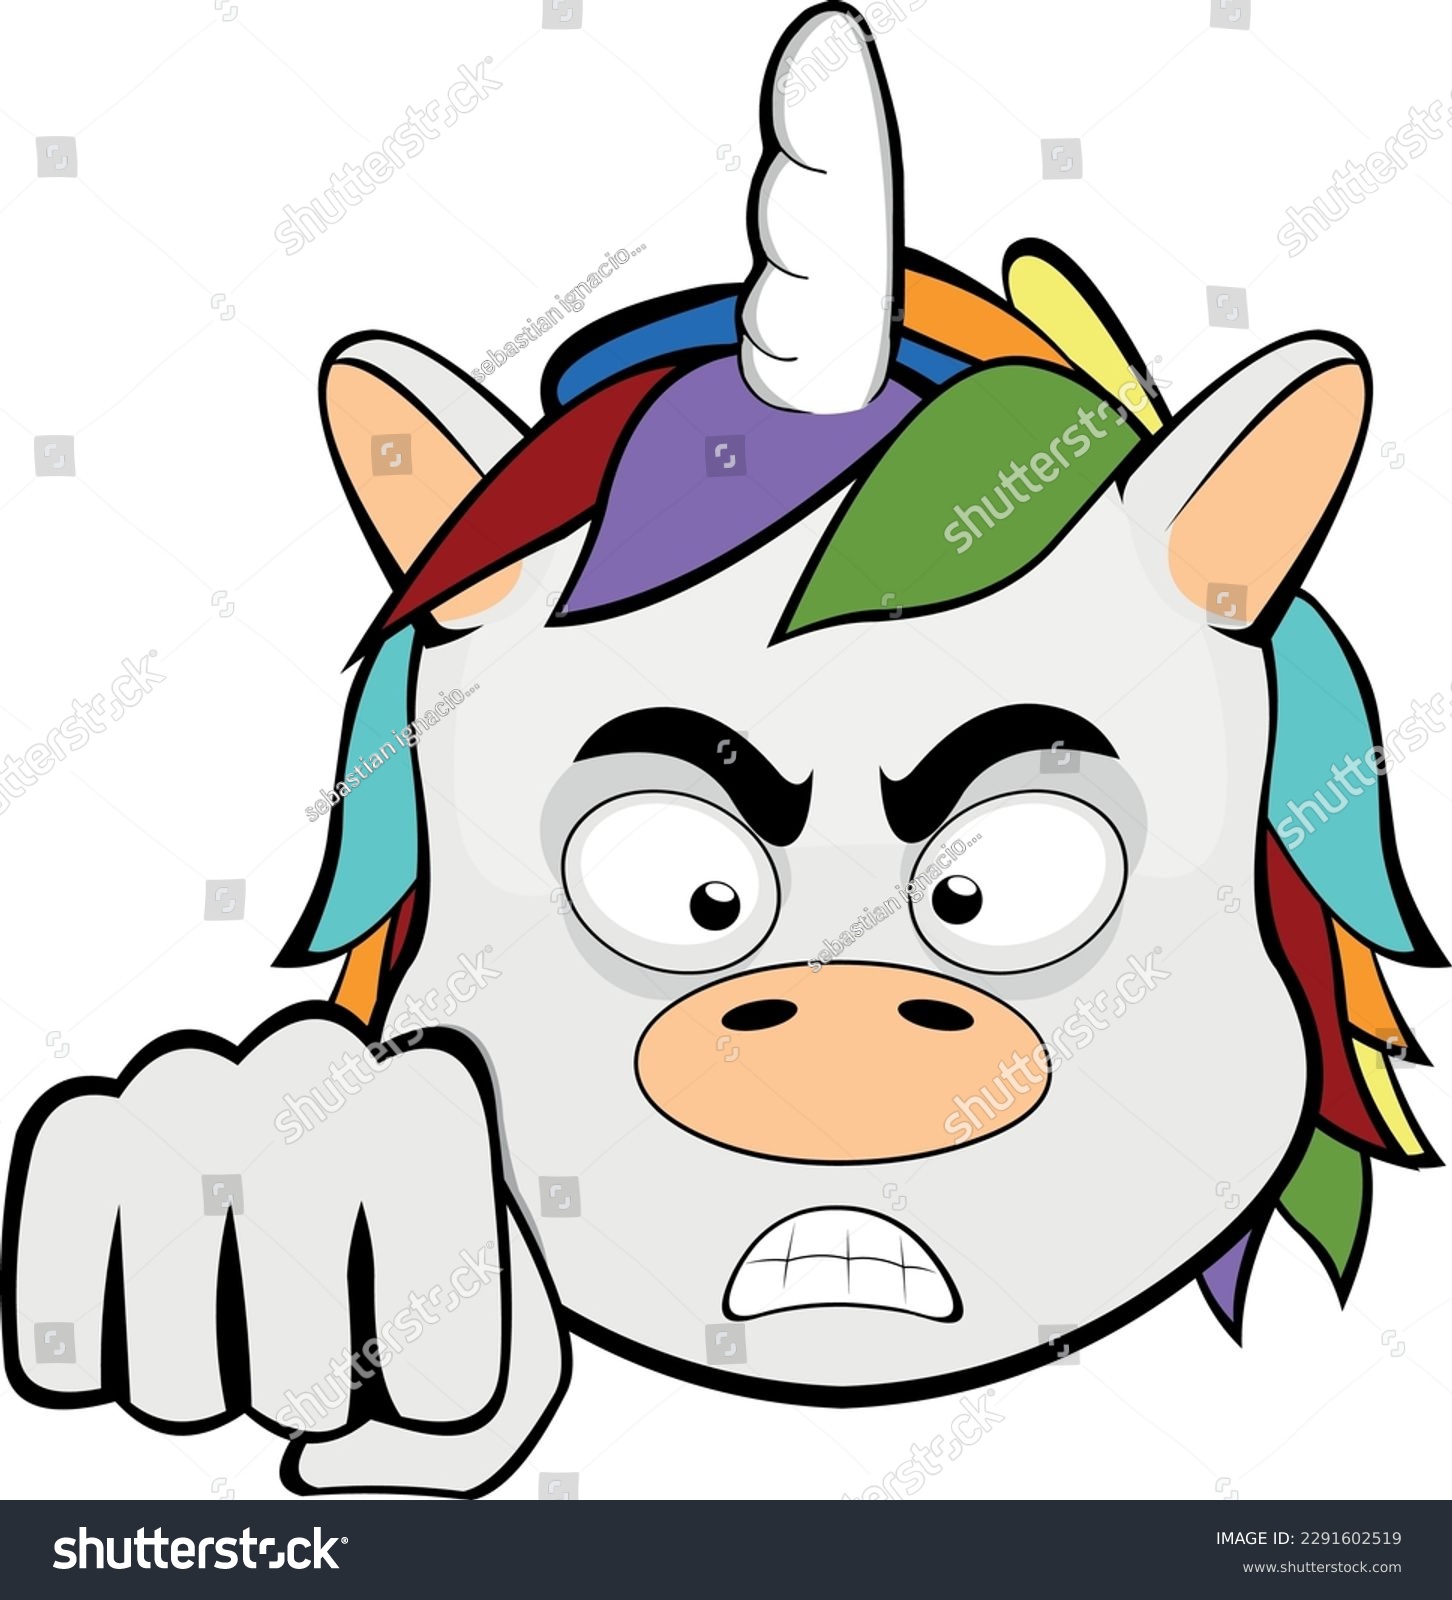 SVG of vector illustration face of an angry unicorn giving a fist bump svg